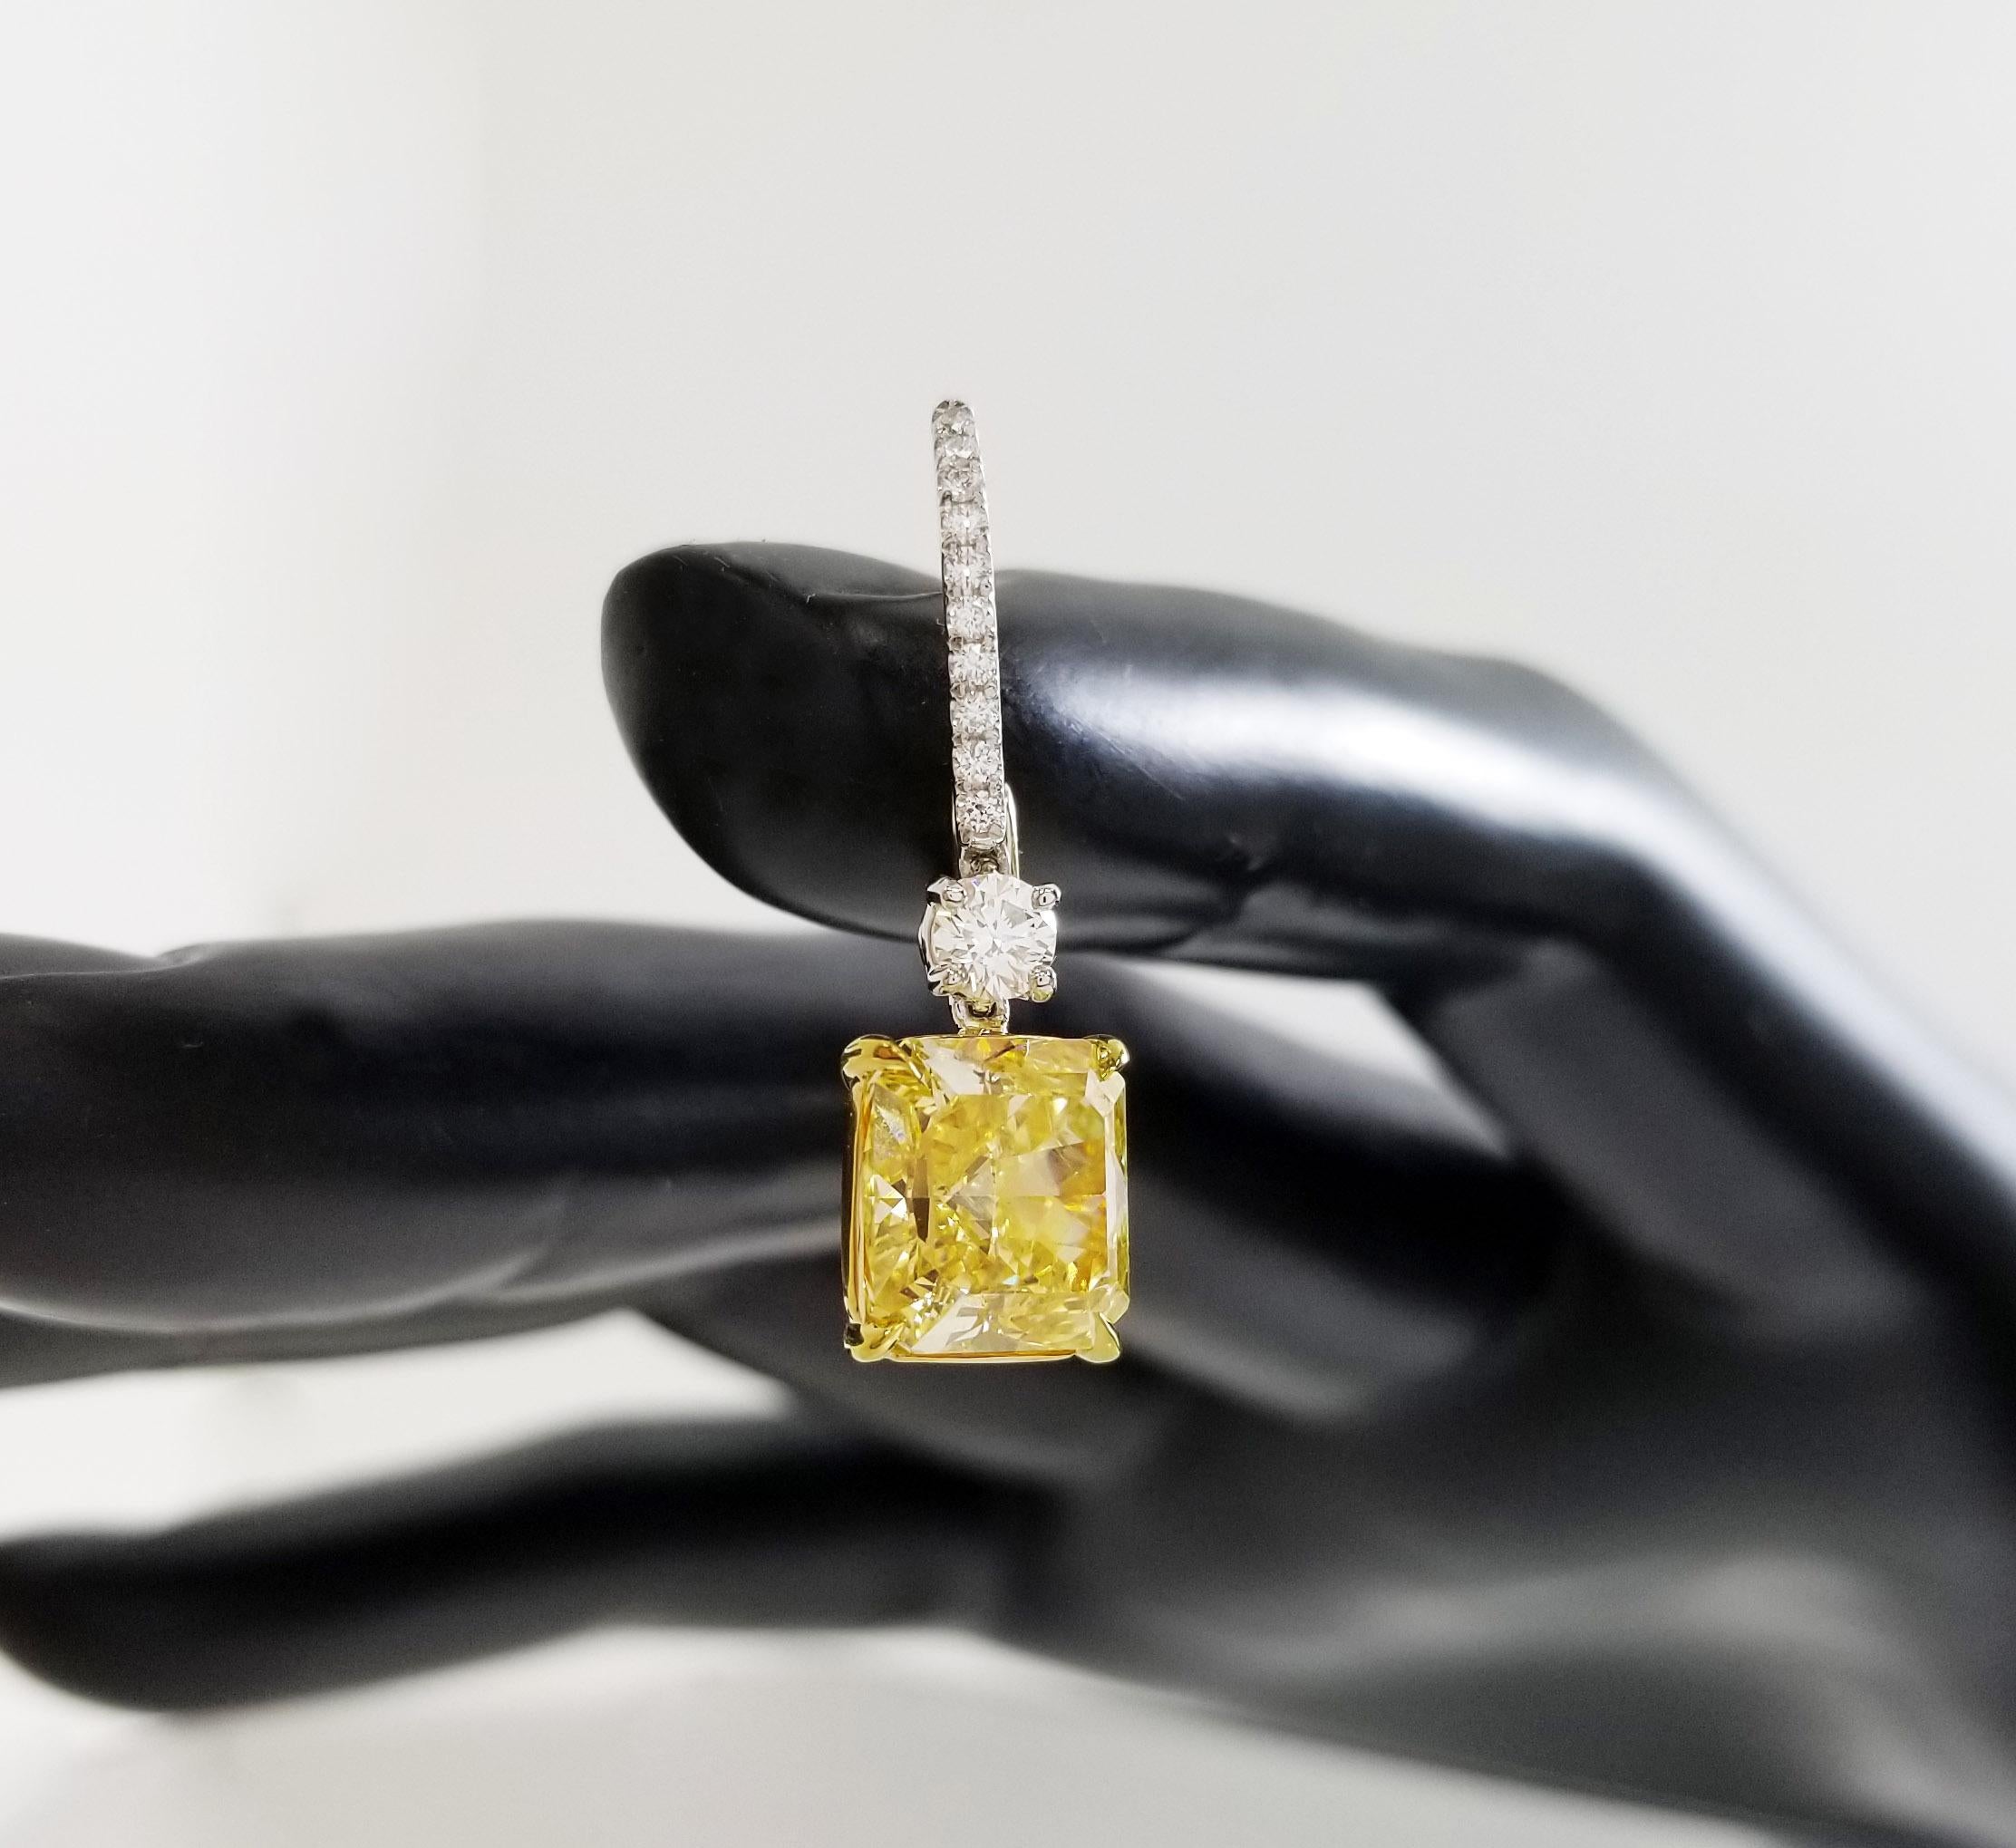 From the Couture Collection at Scarselli, these Fancy Intense Yellow Radiant Cut Diamonds are 3 carats each VVS clarity. Diamonds are certified by GIA 5131639520 and 2215261481 (see certificate pictures for detailed stones information). The Yellow